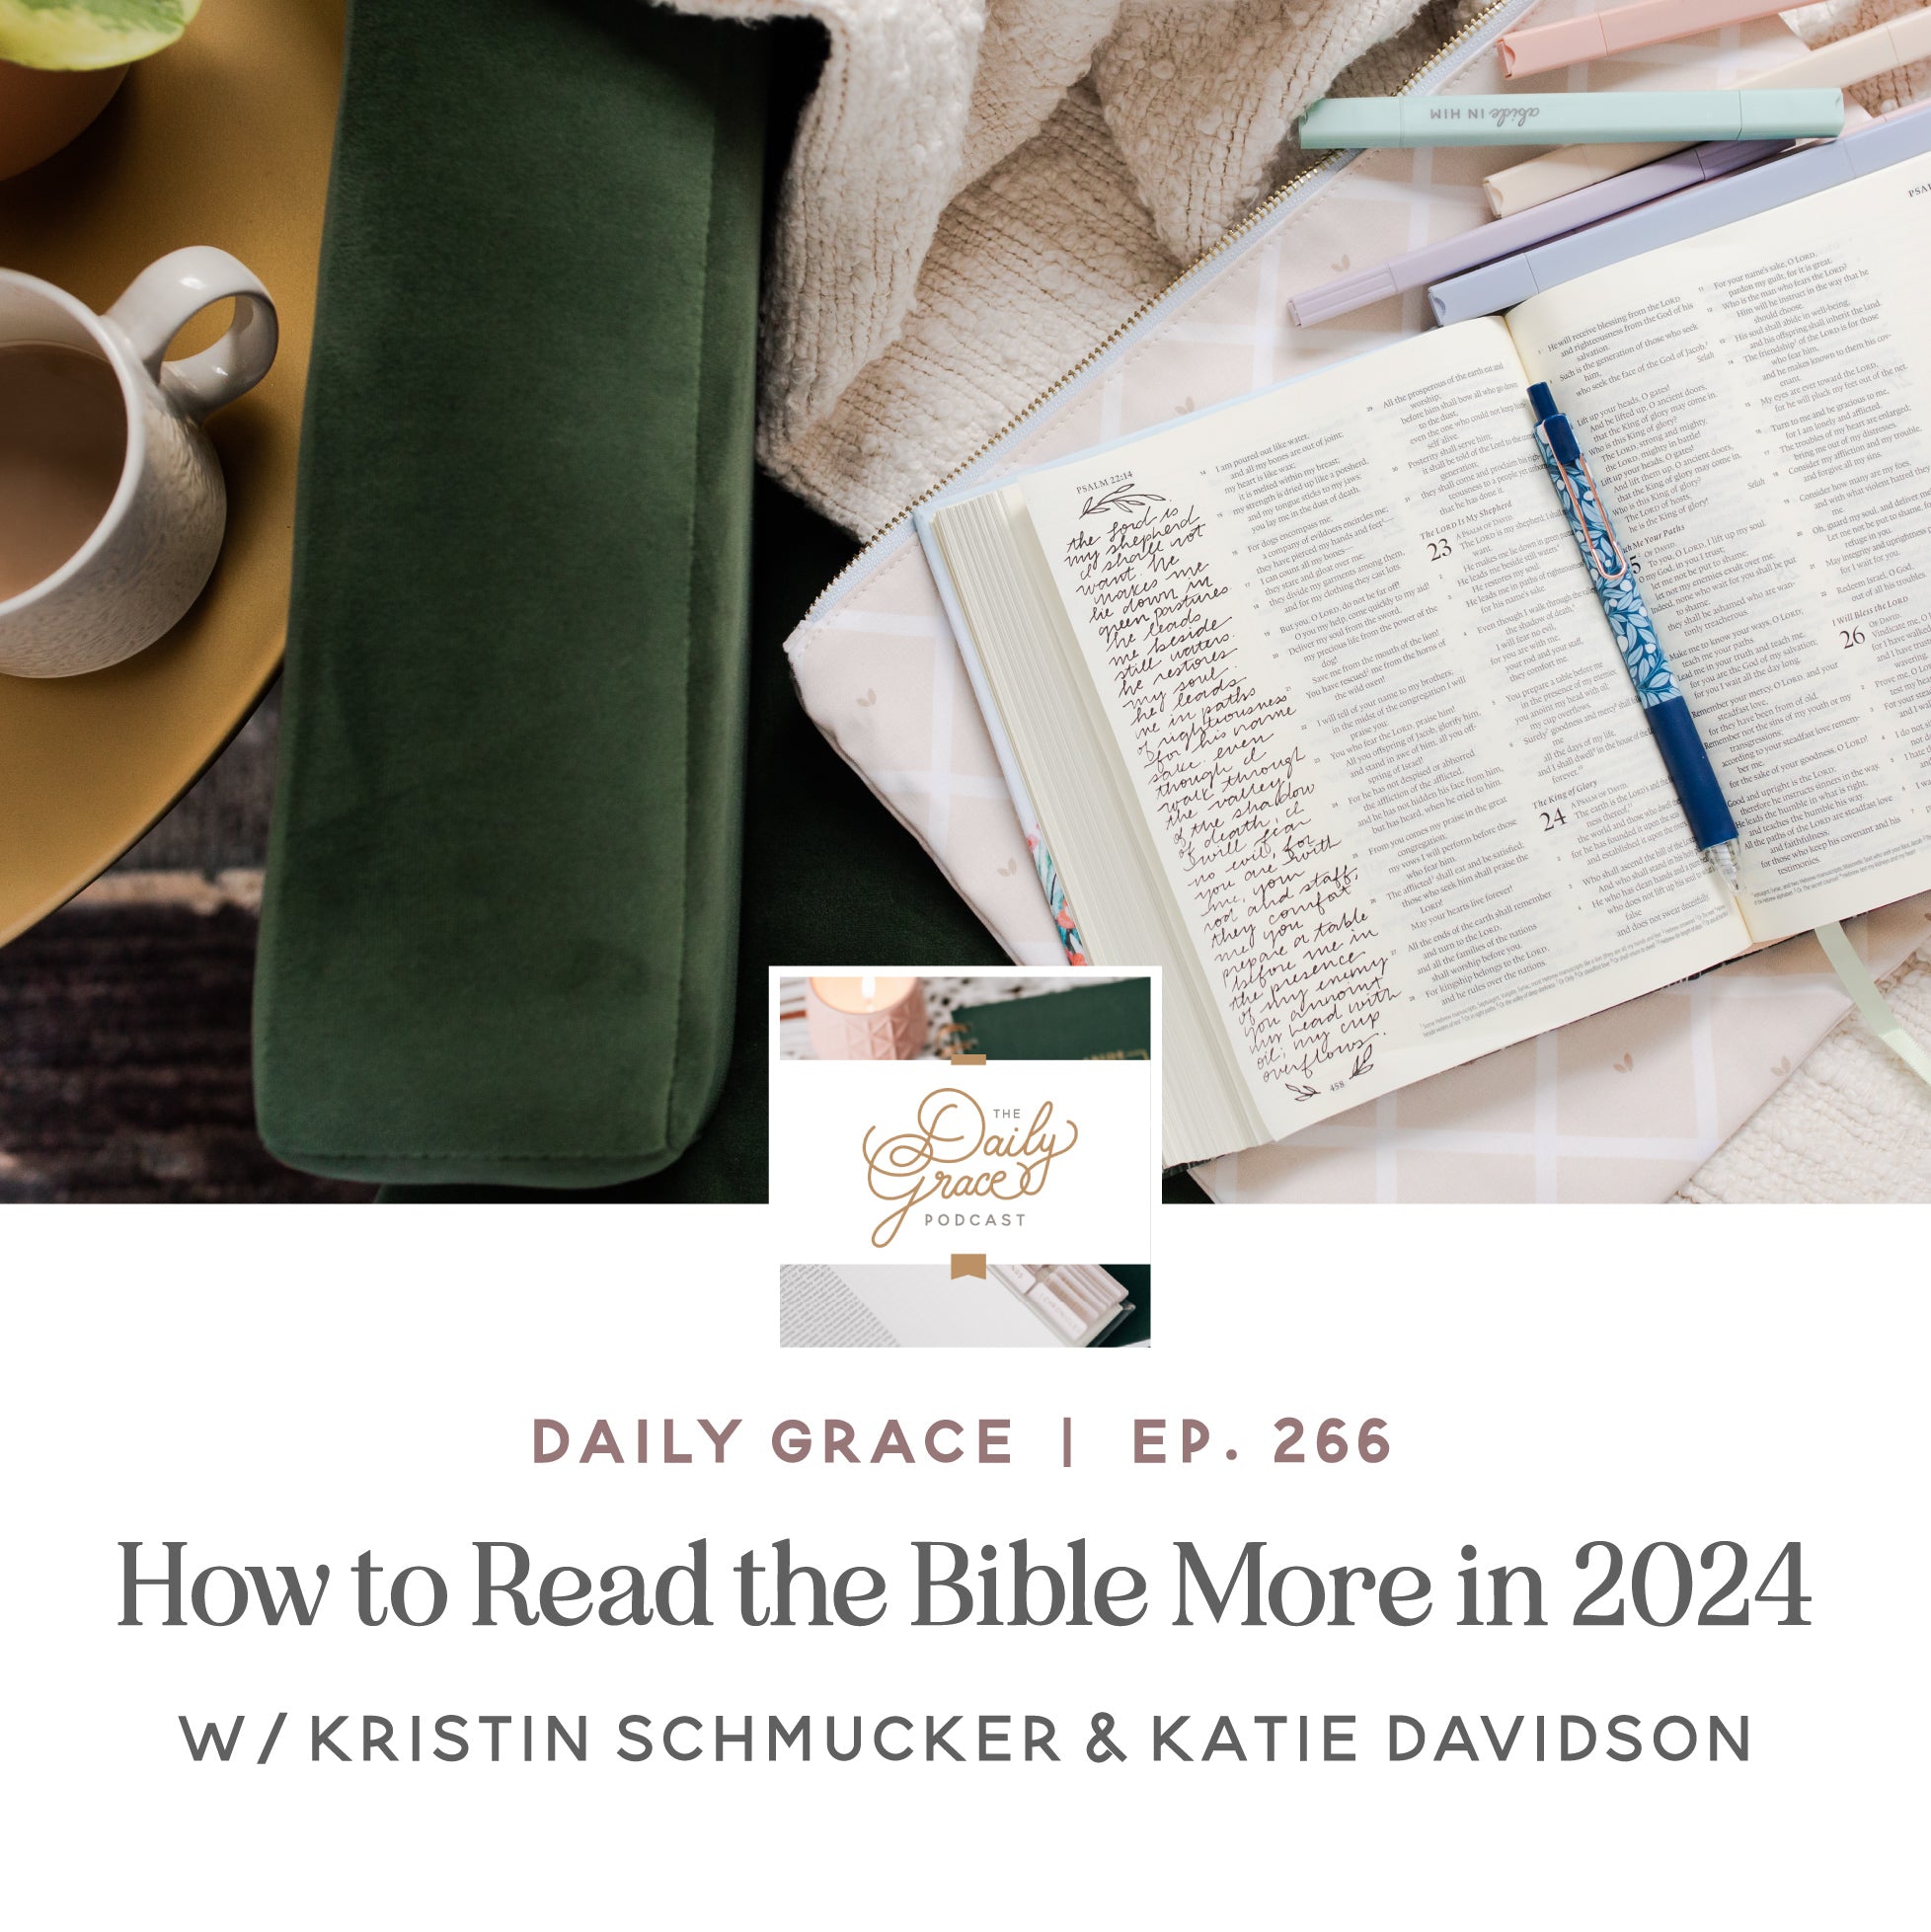 How to Read the Bible More in 2024 w/Kristin Schmucker and Katie Davidson